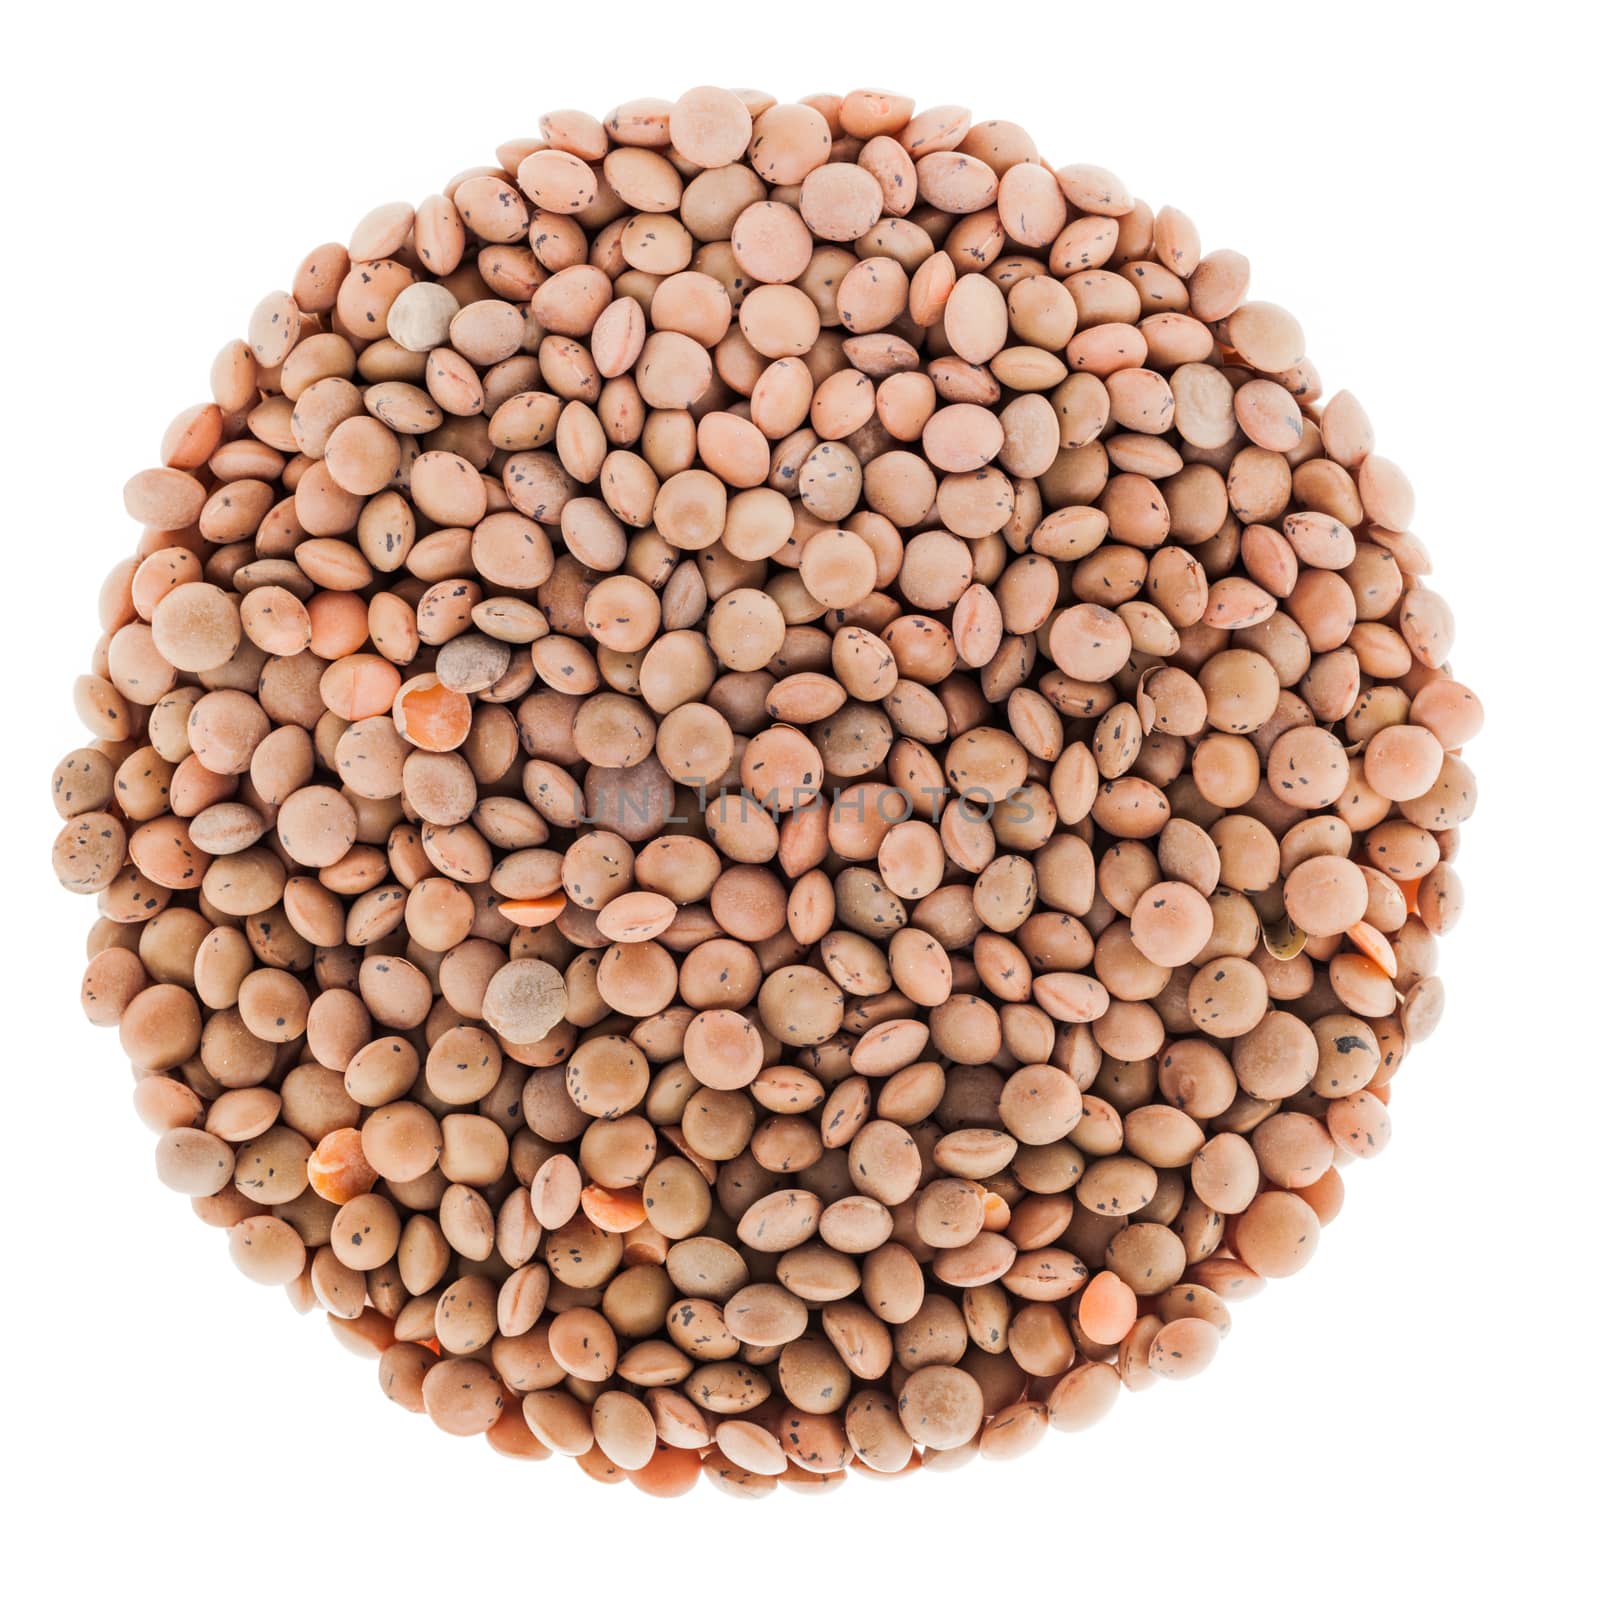 Lentils Circle Isolated on White Background by aetb